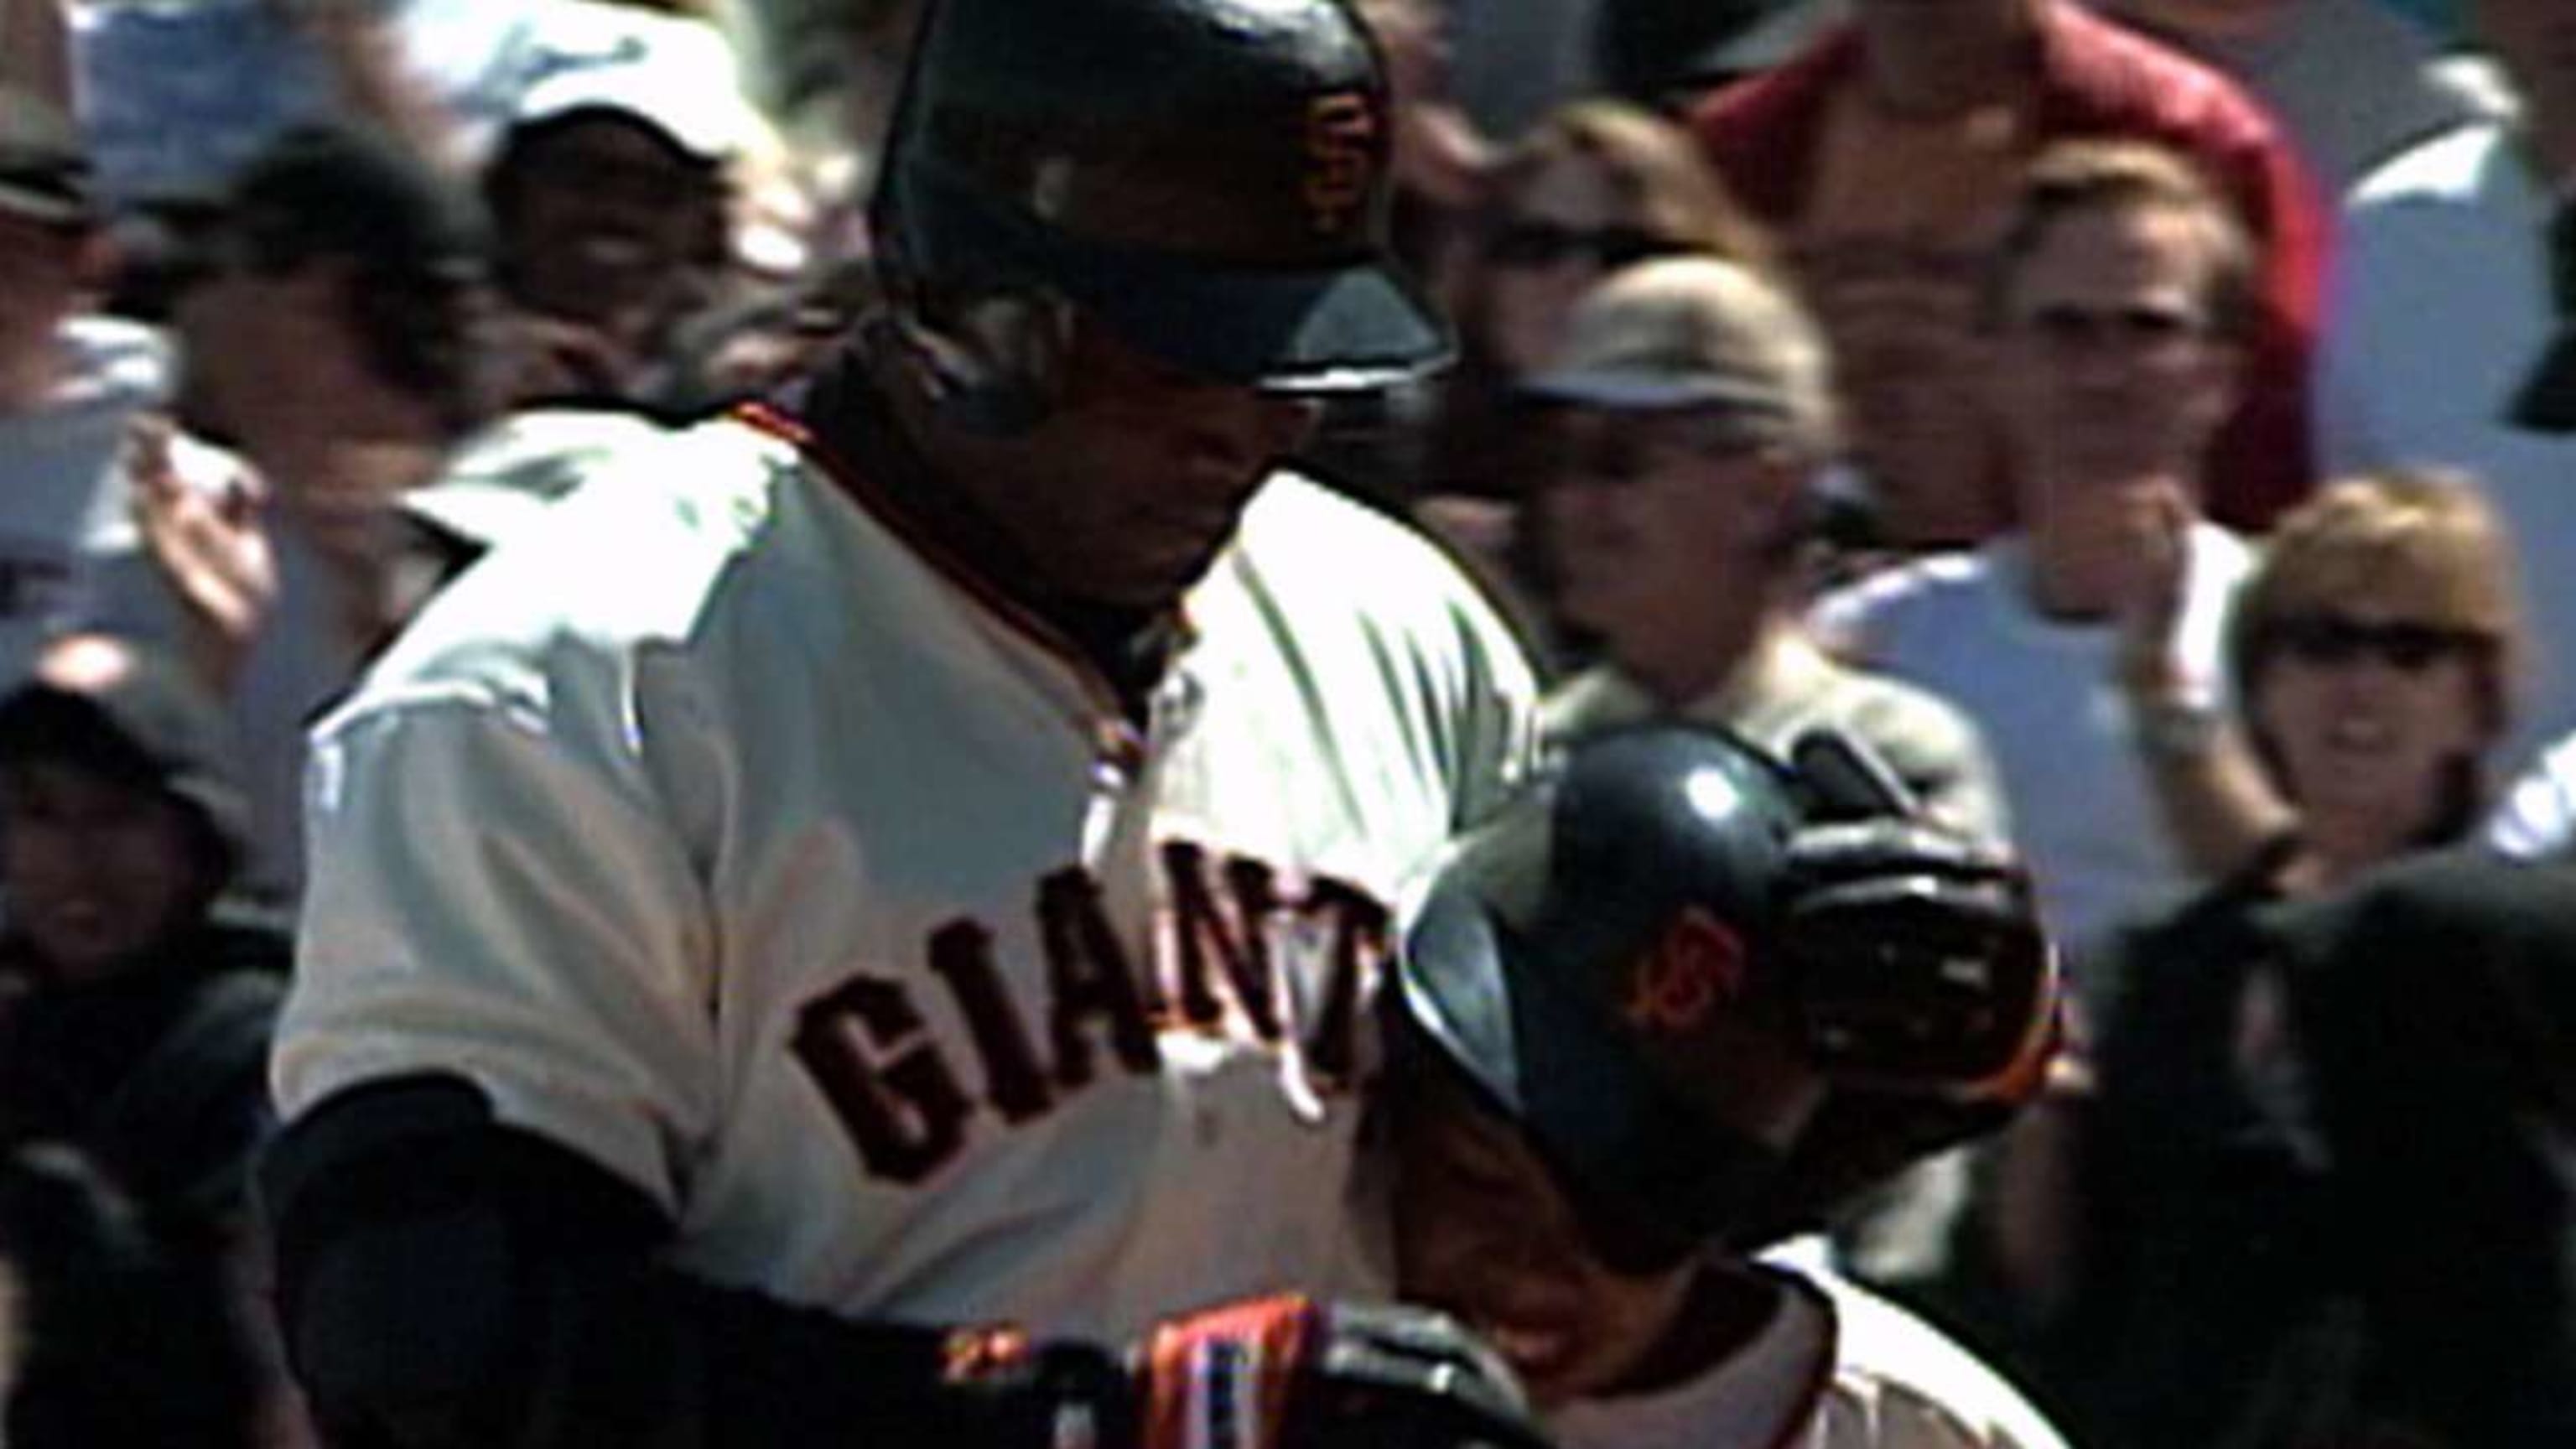 Jack Suwinski joins Barry Bonds after hitting 2 HRs in McCovey Cove - ESPN